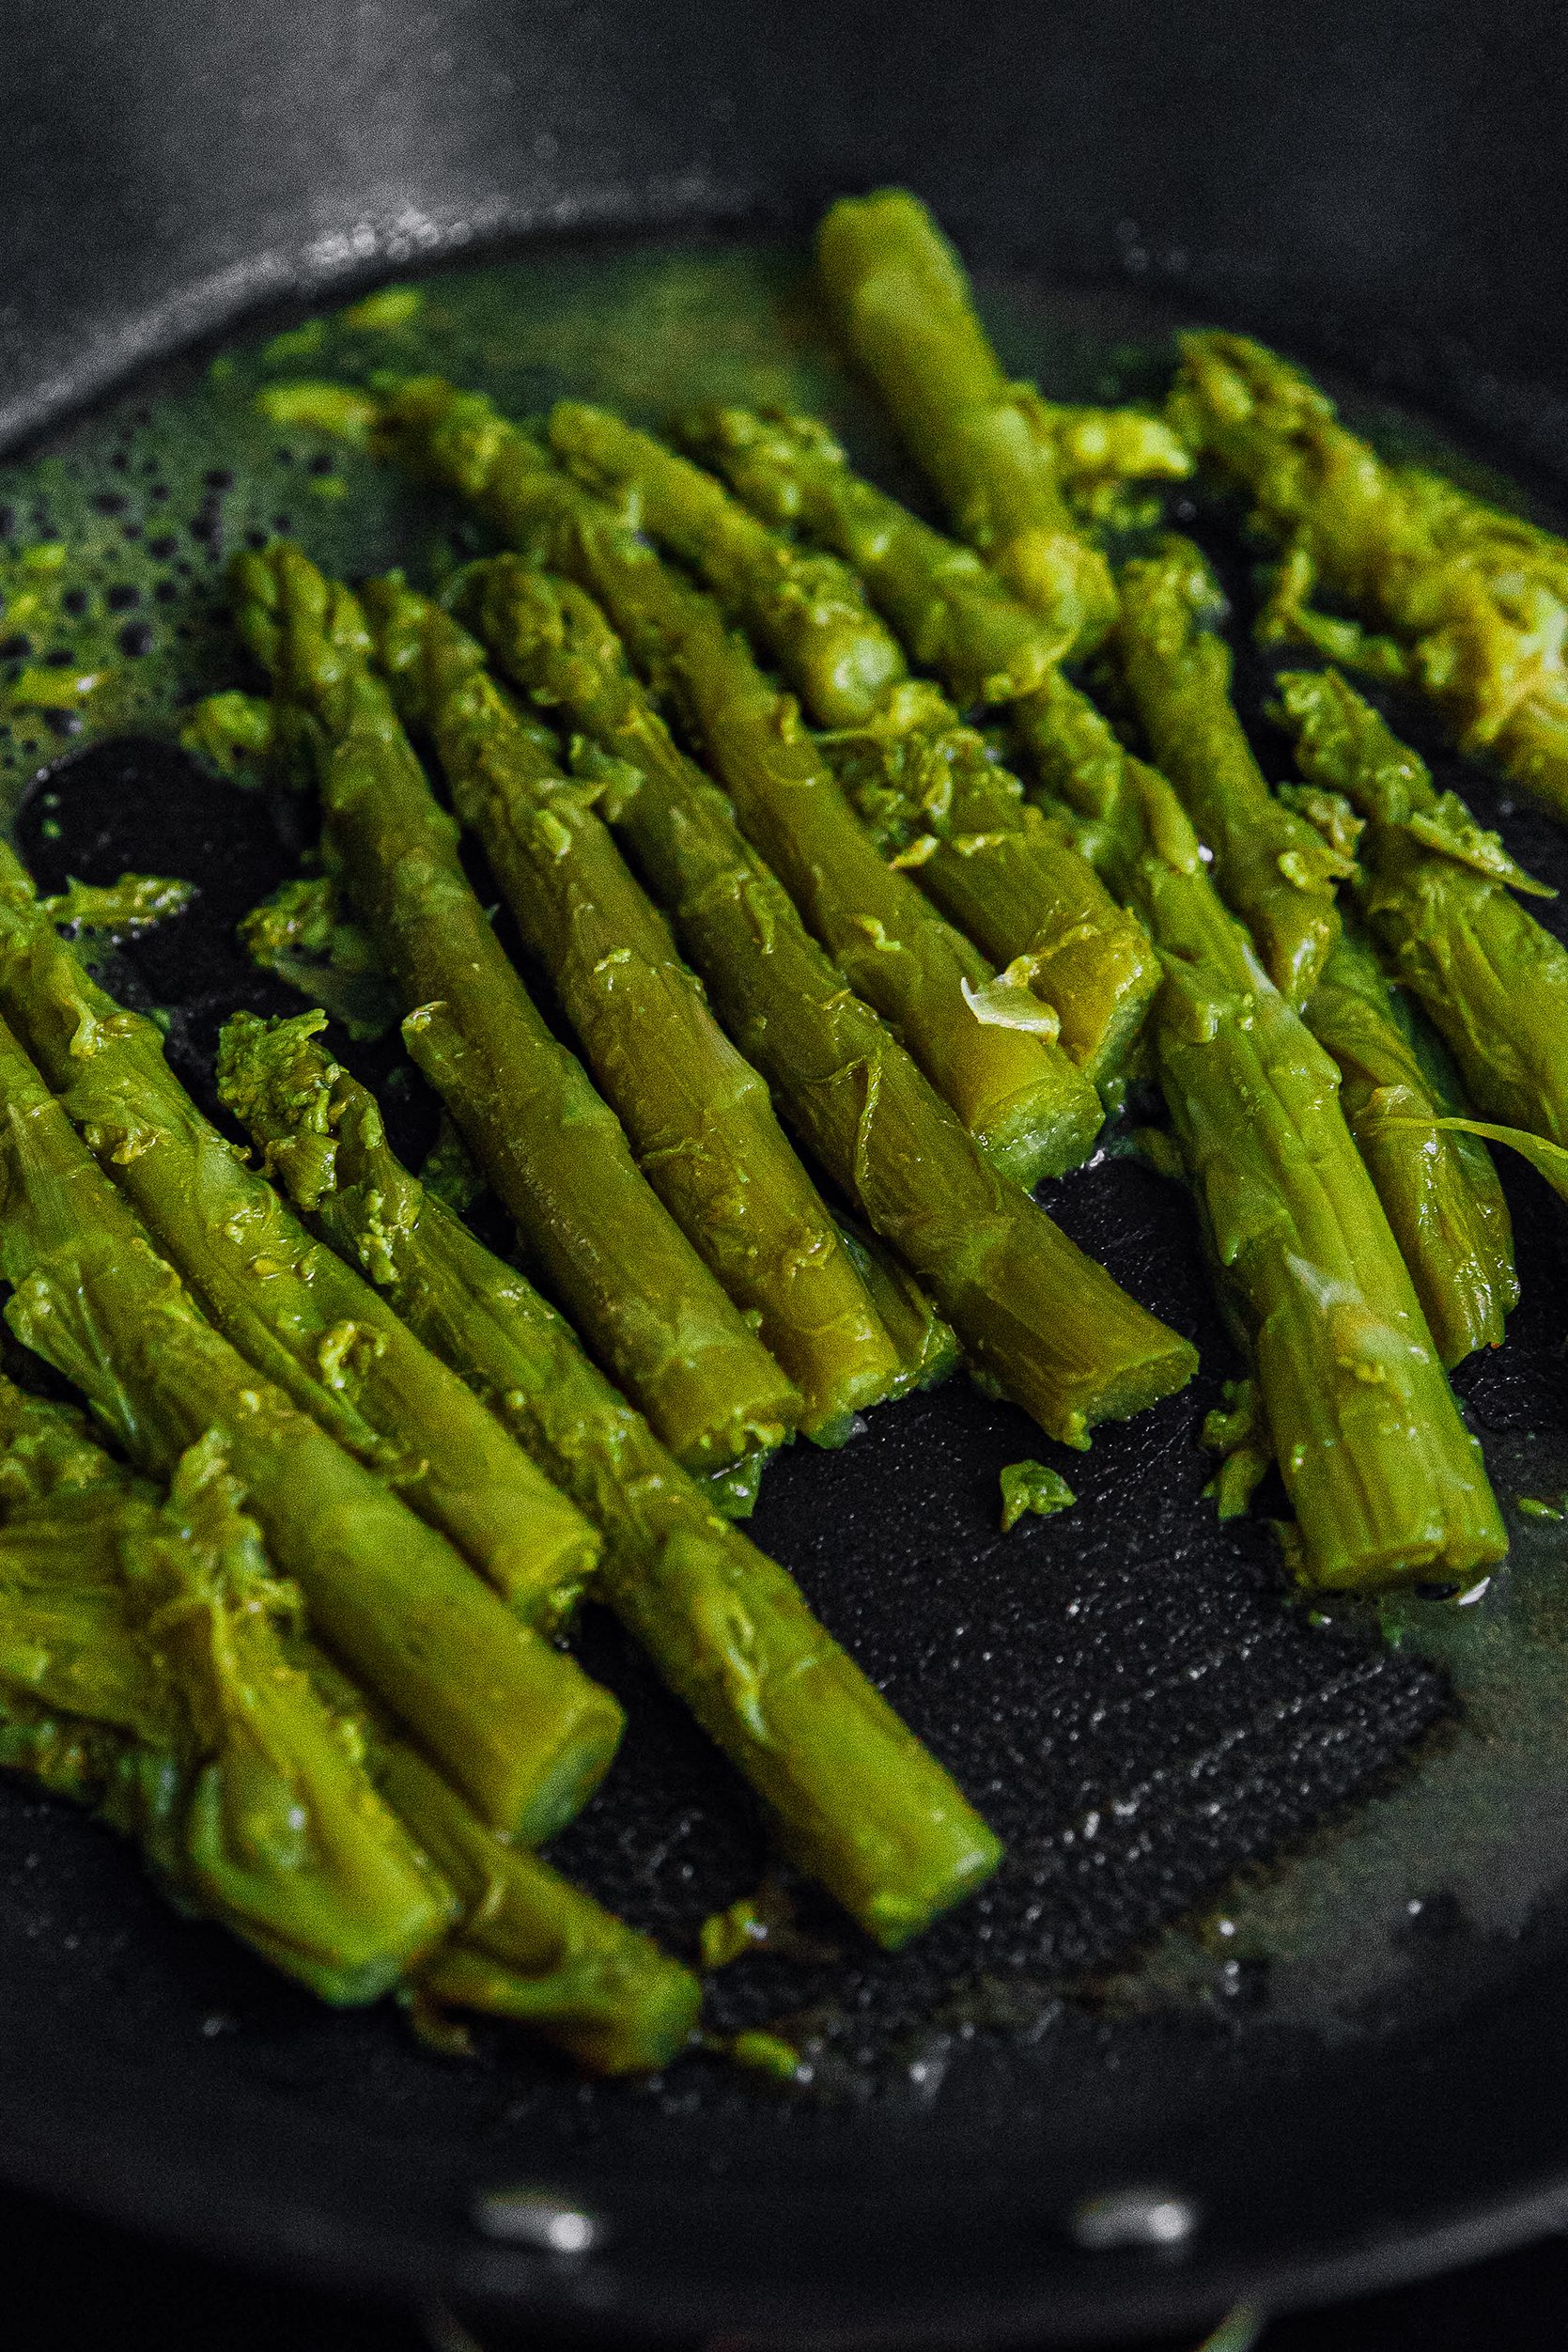 Add asparagus and cook until done, about 4-6 minutes.